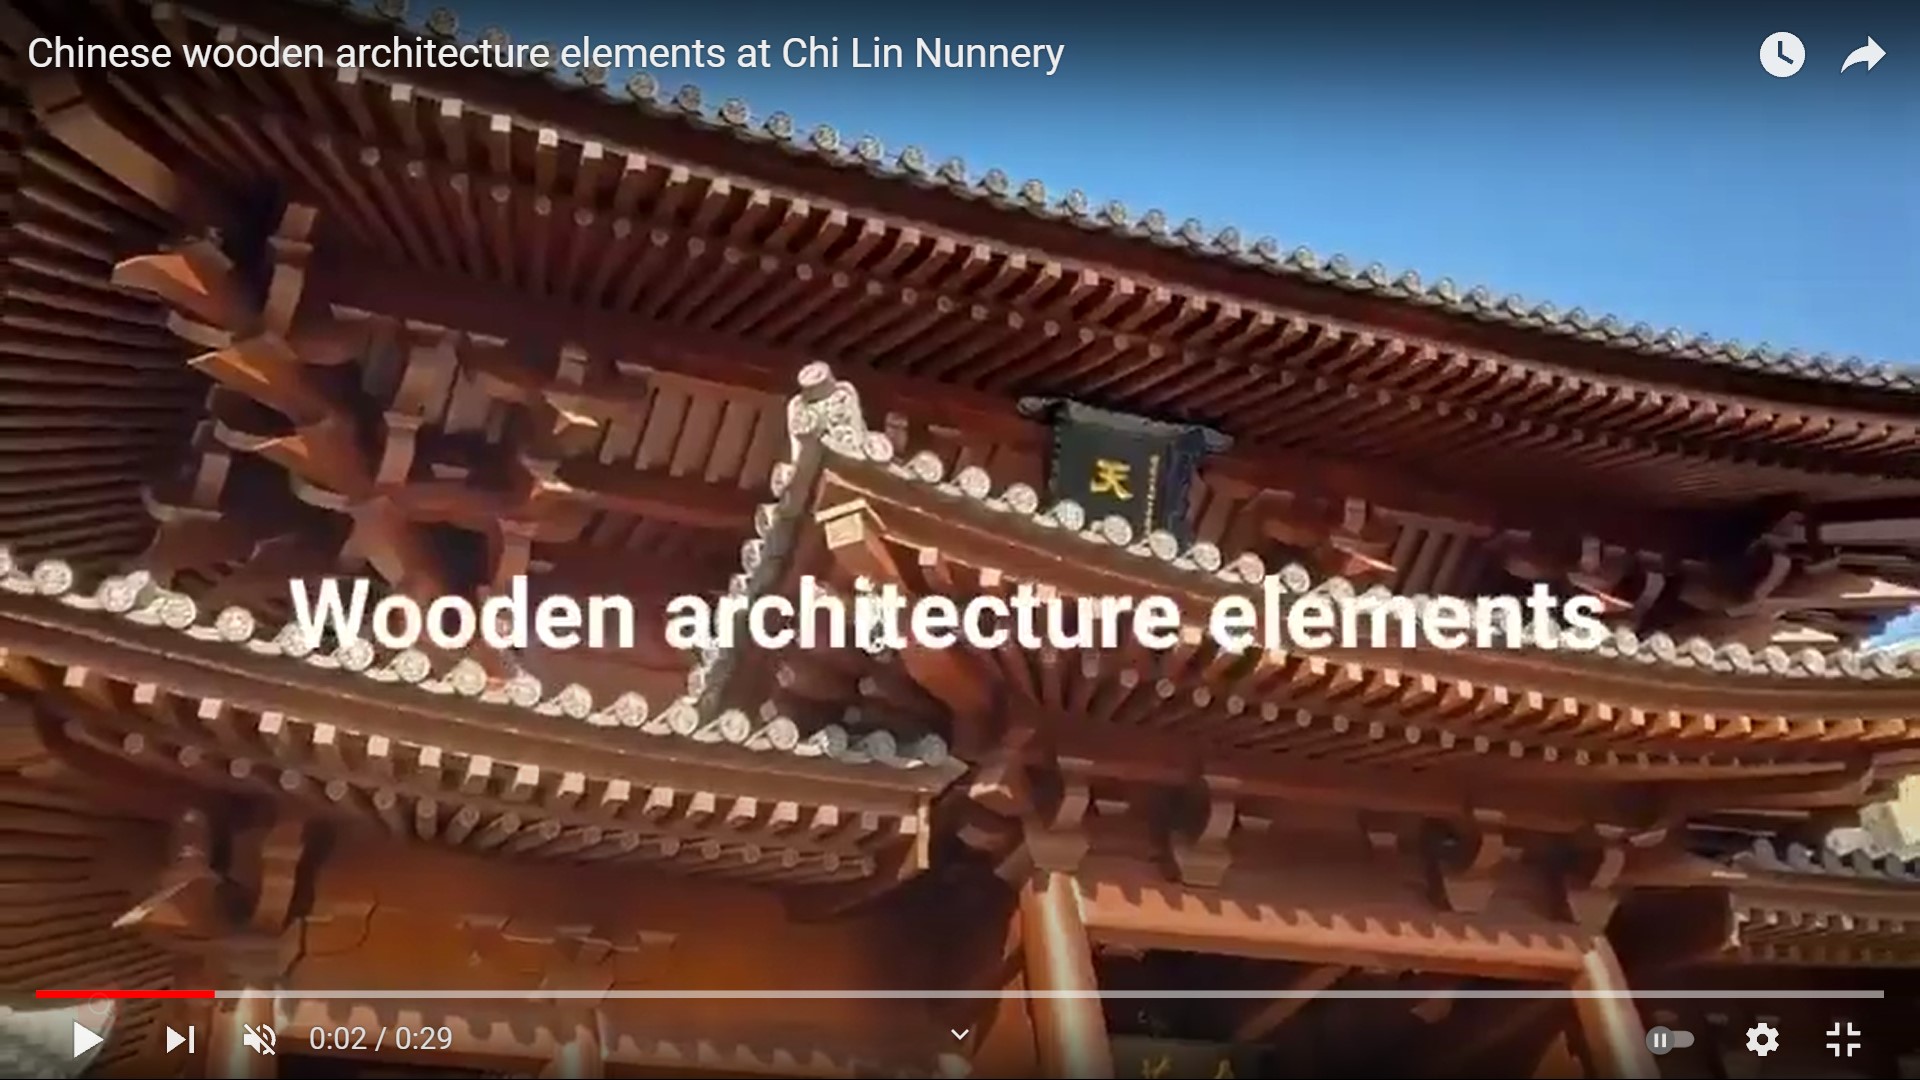 “Chinese wooden architecture elements at Chi Lin Nunnery” snapshots video of Frank